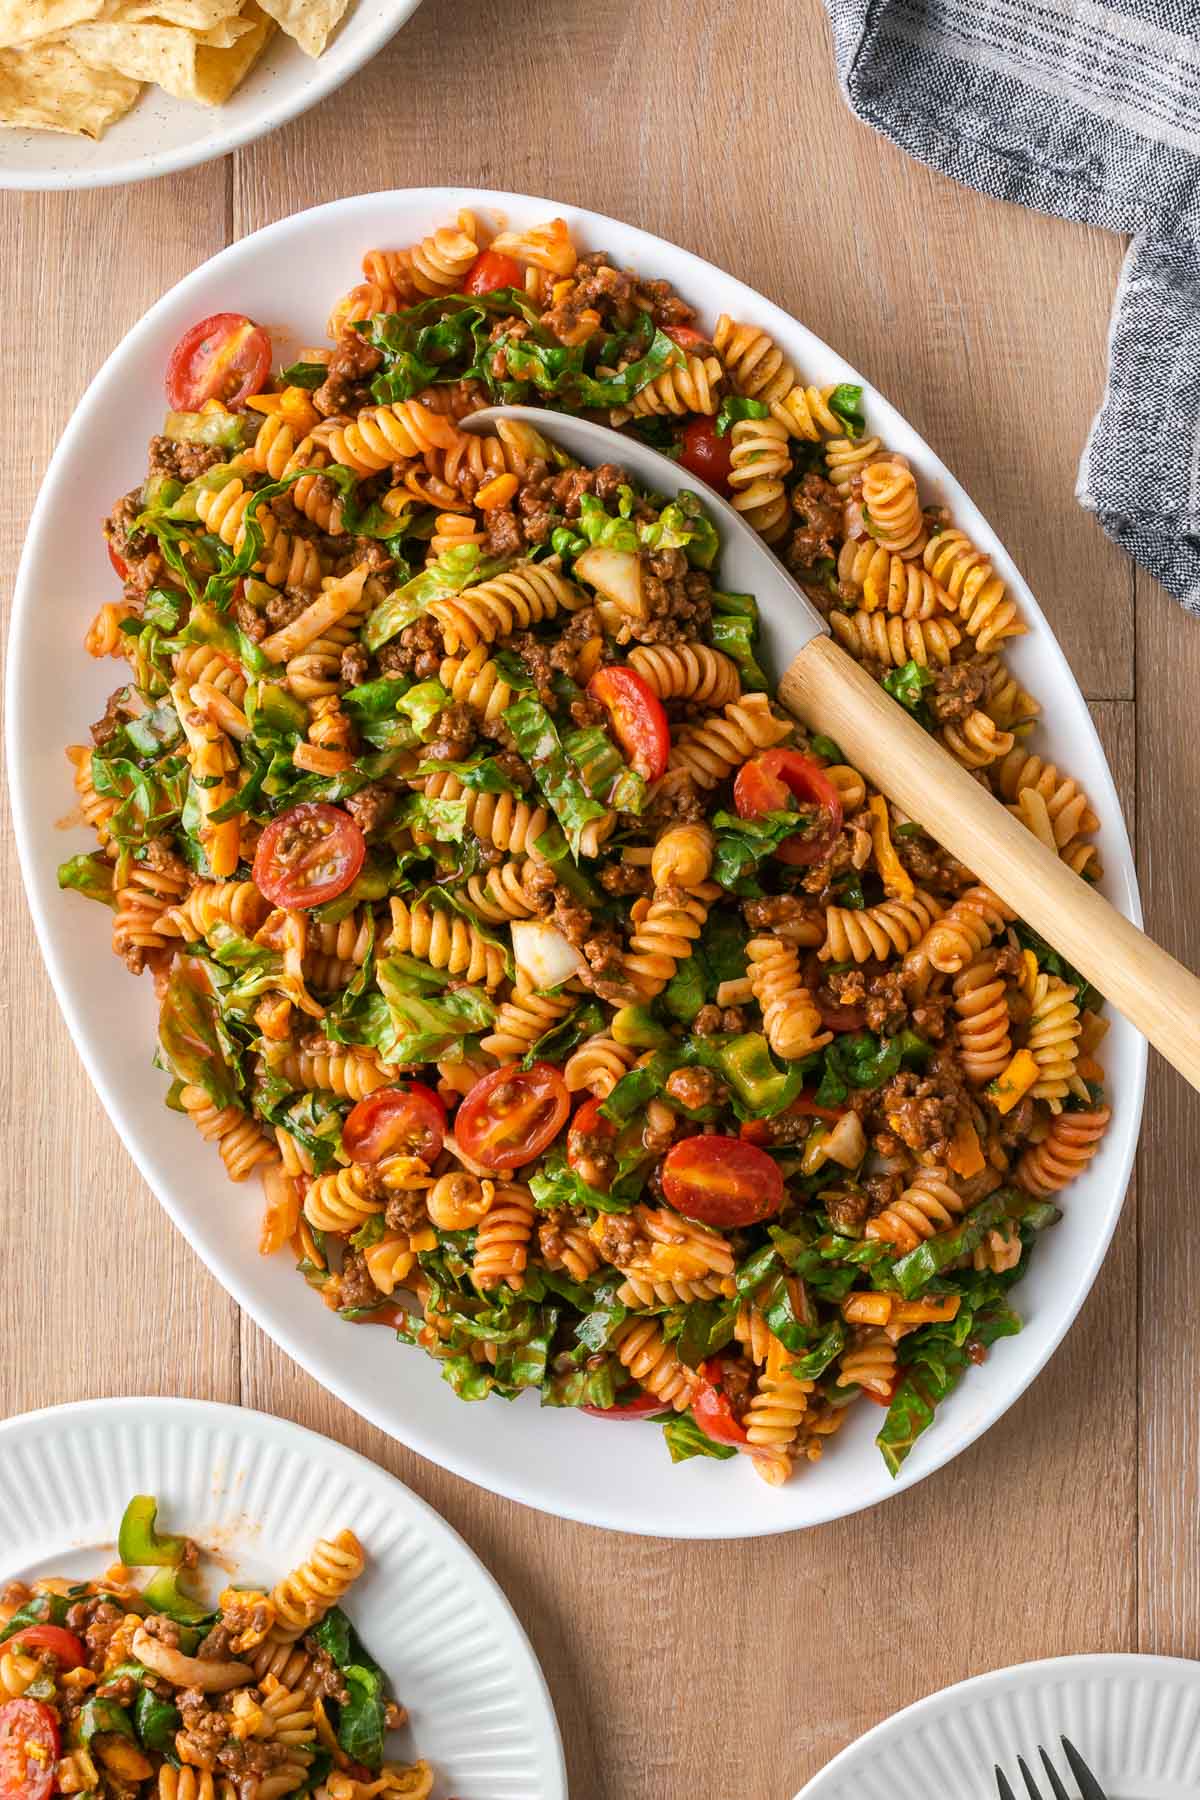 Big spoon, scooping out taco pasta salad from a whtie platter.